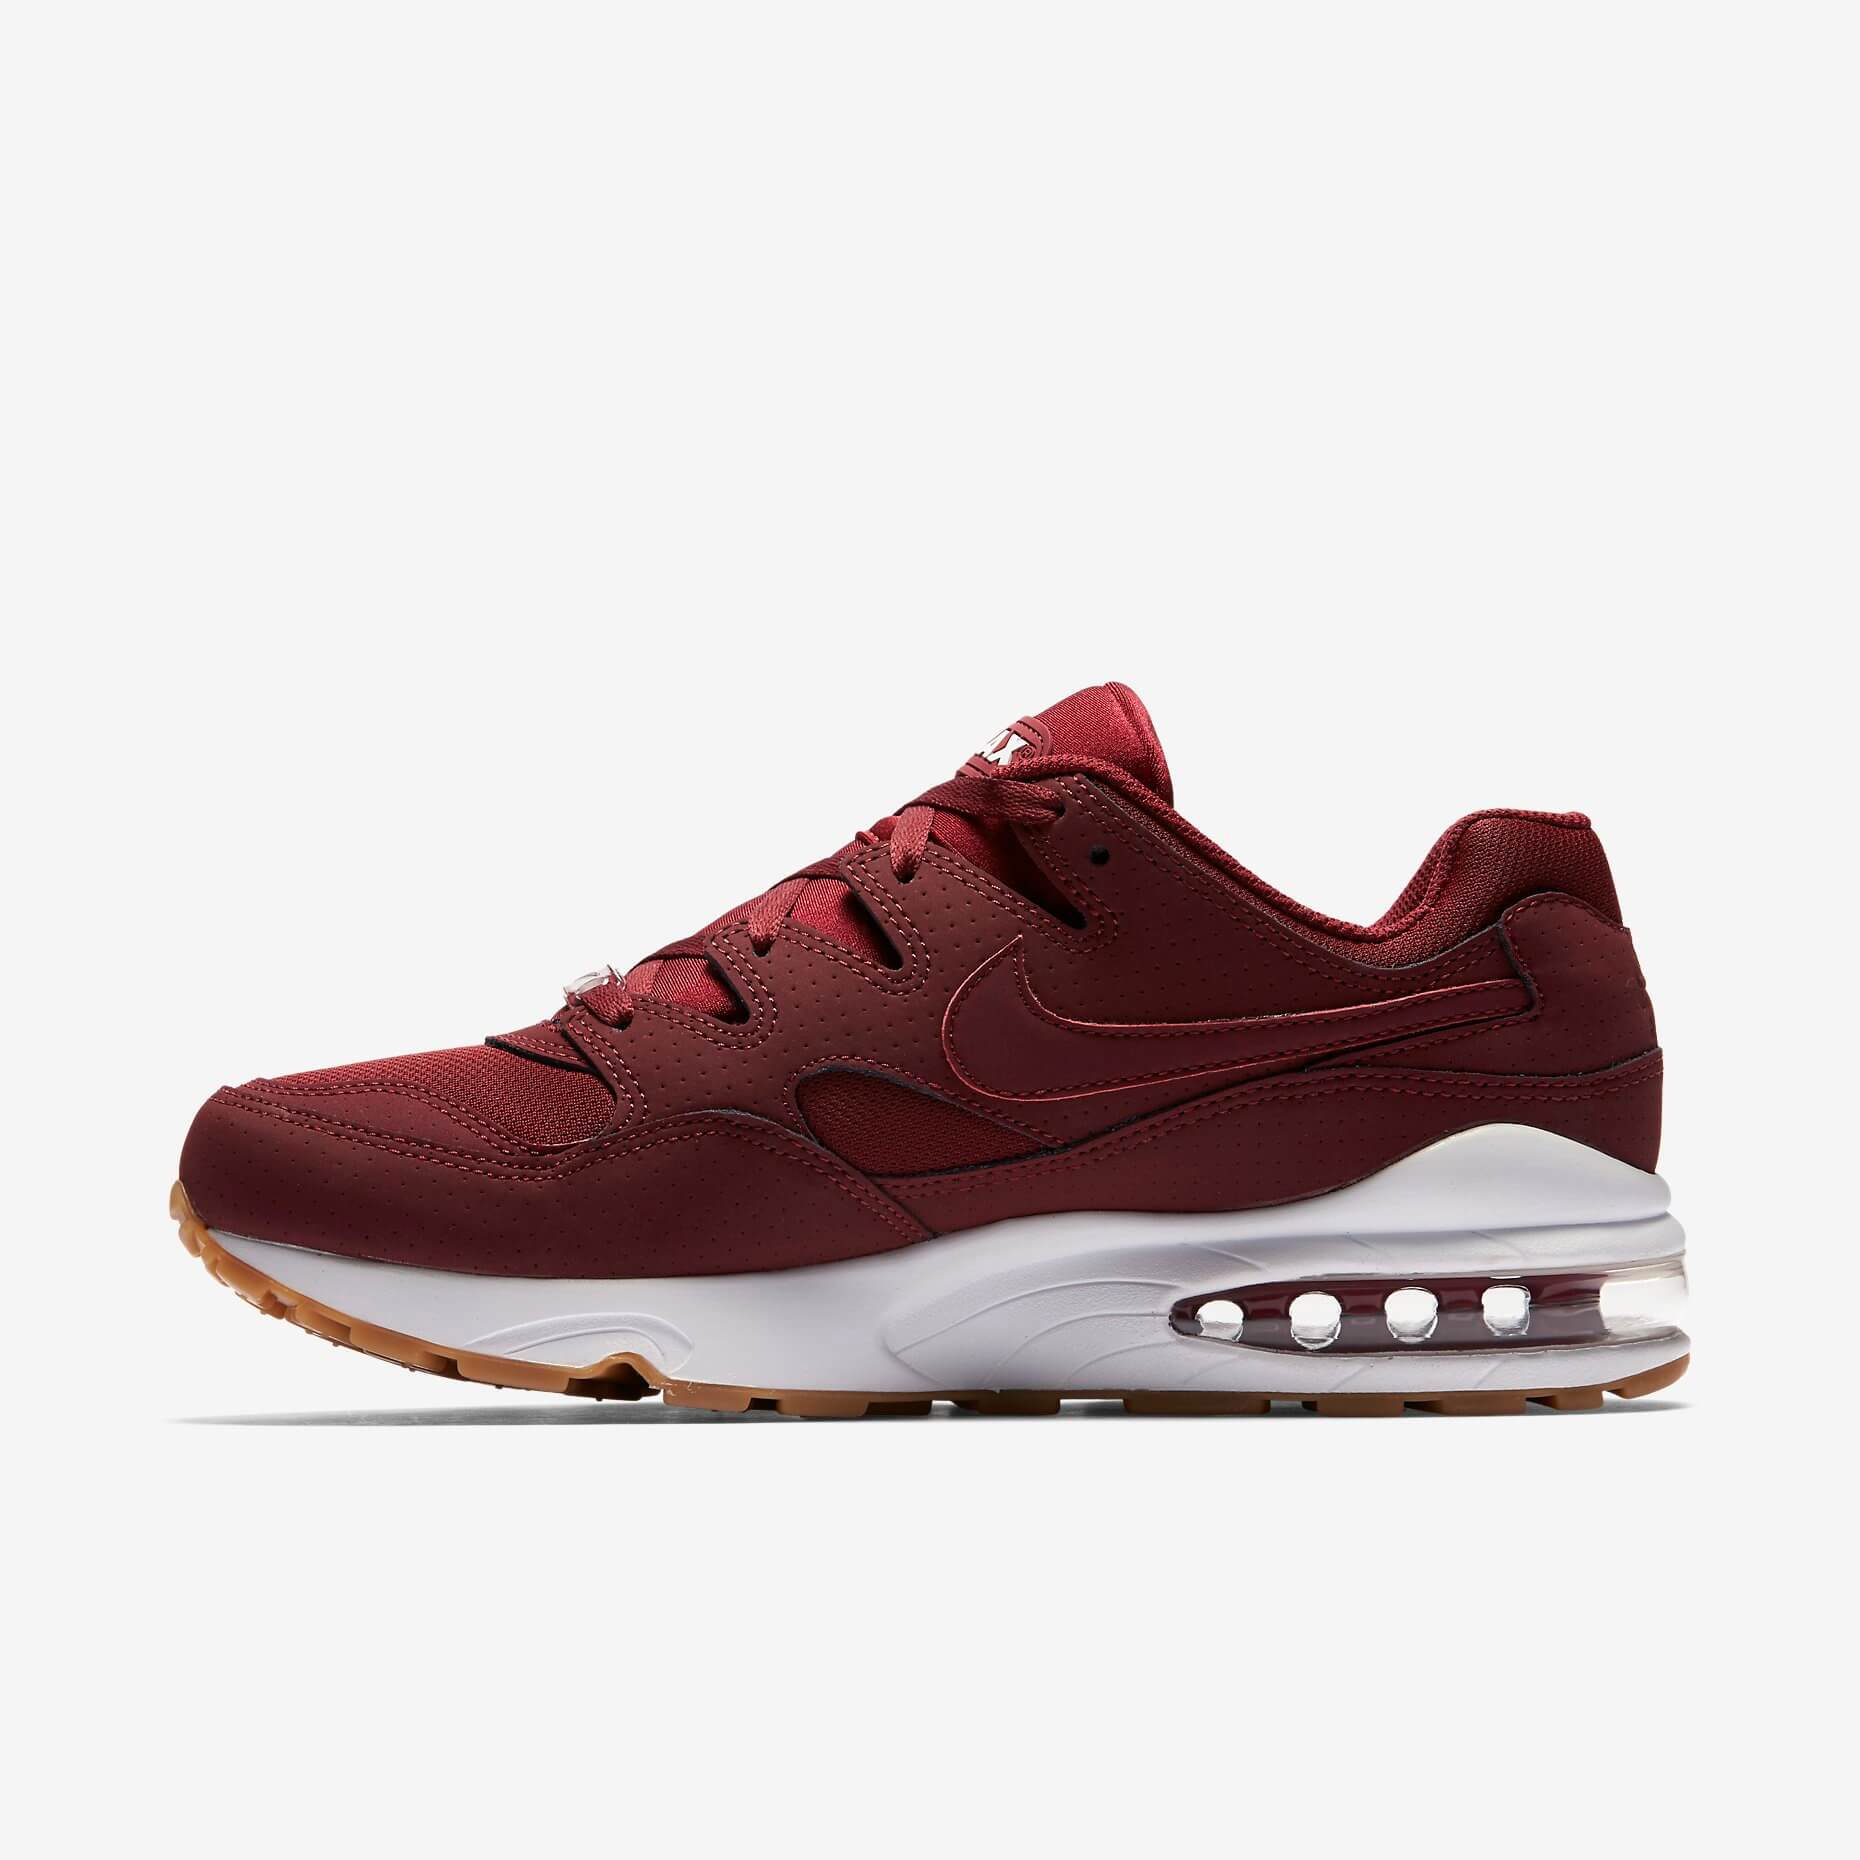 Air Max Premium Team Red | Where To Buy | 806238-669 | Sole Supplier